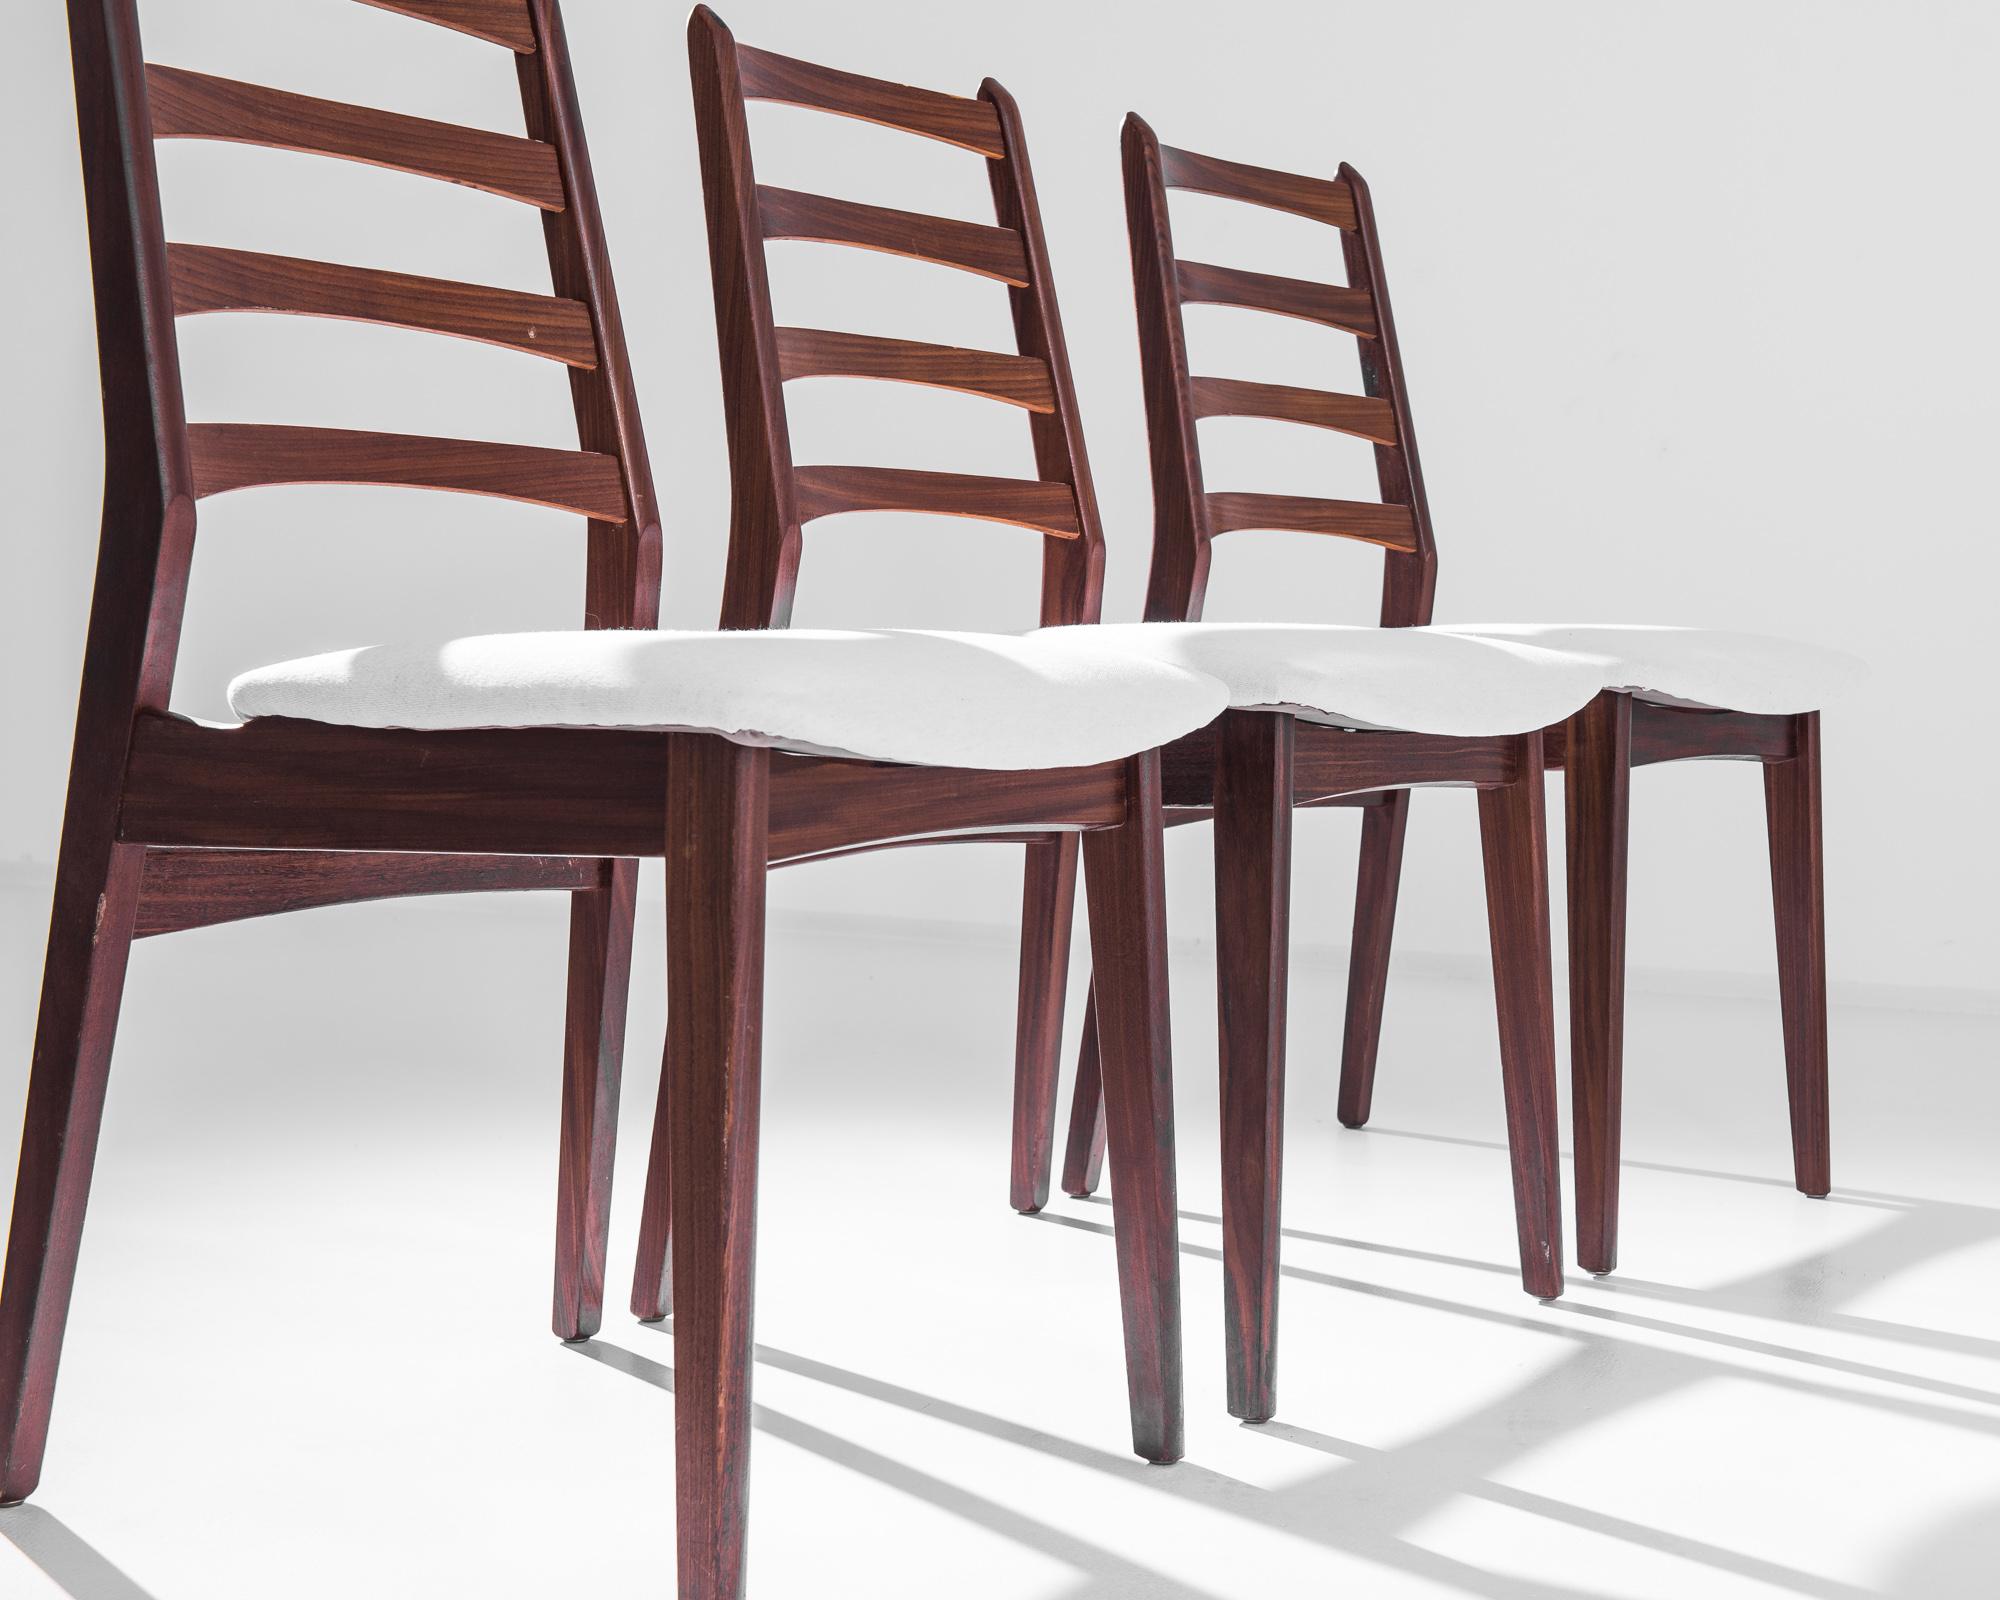 Upholstery 1960s Danish Teak Chairs with Upholstered Seats, Set of 4 For Sale